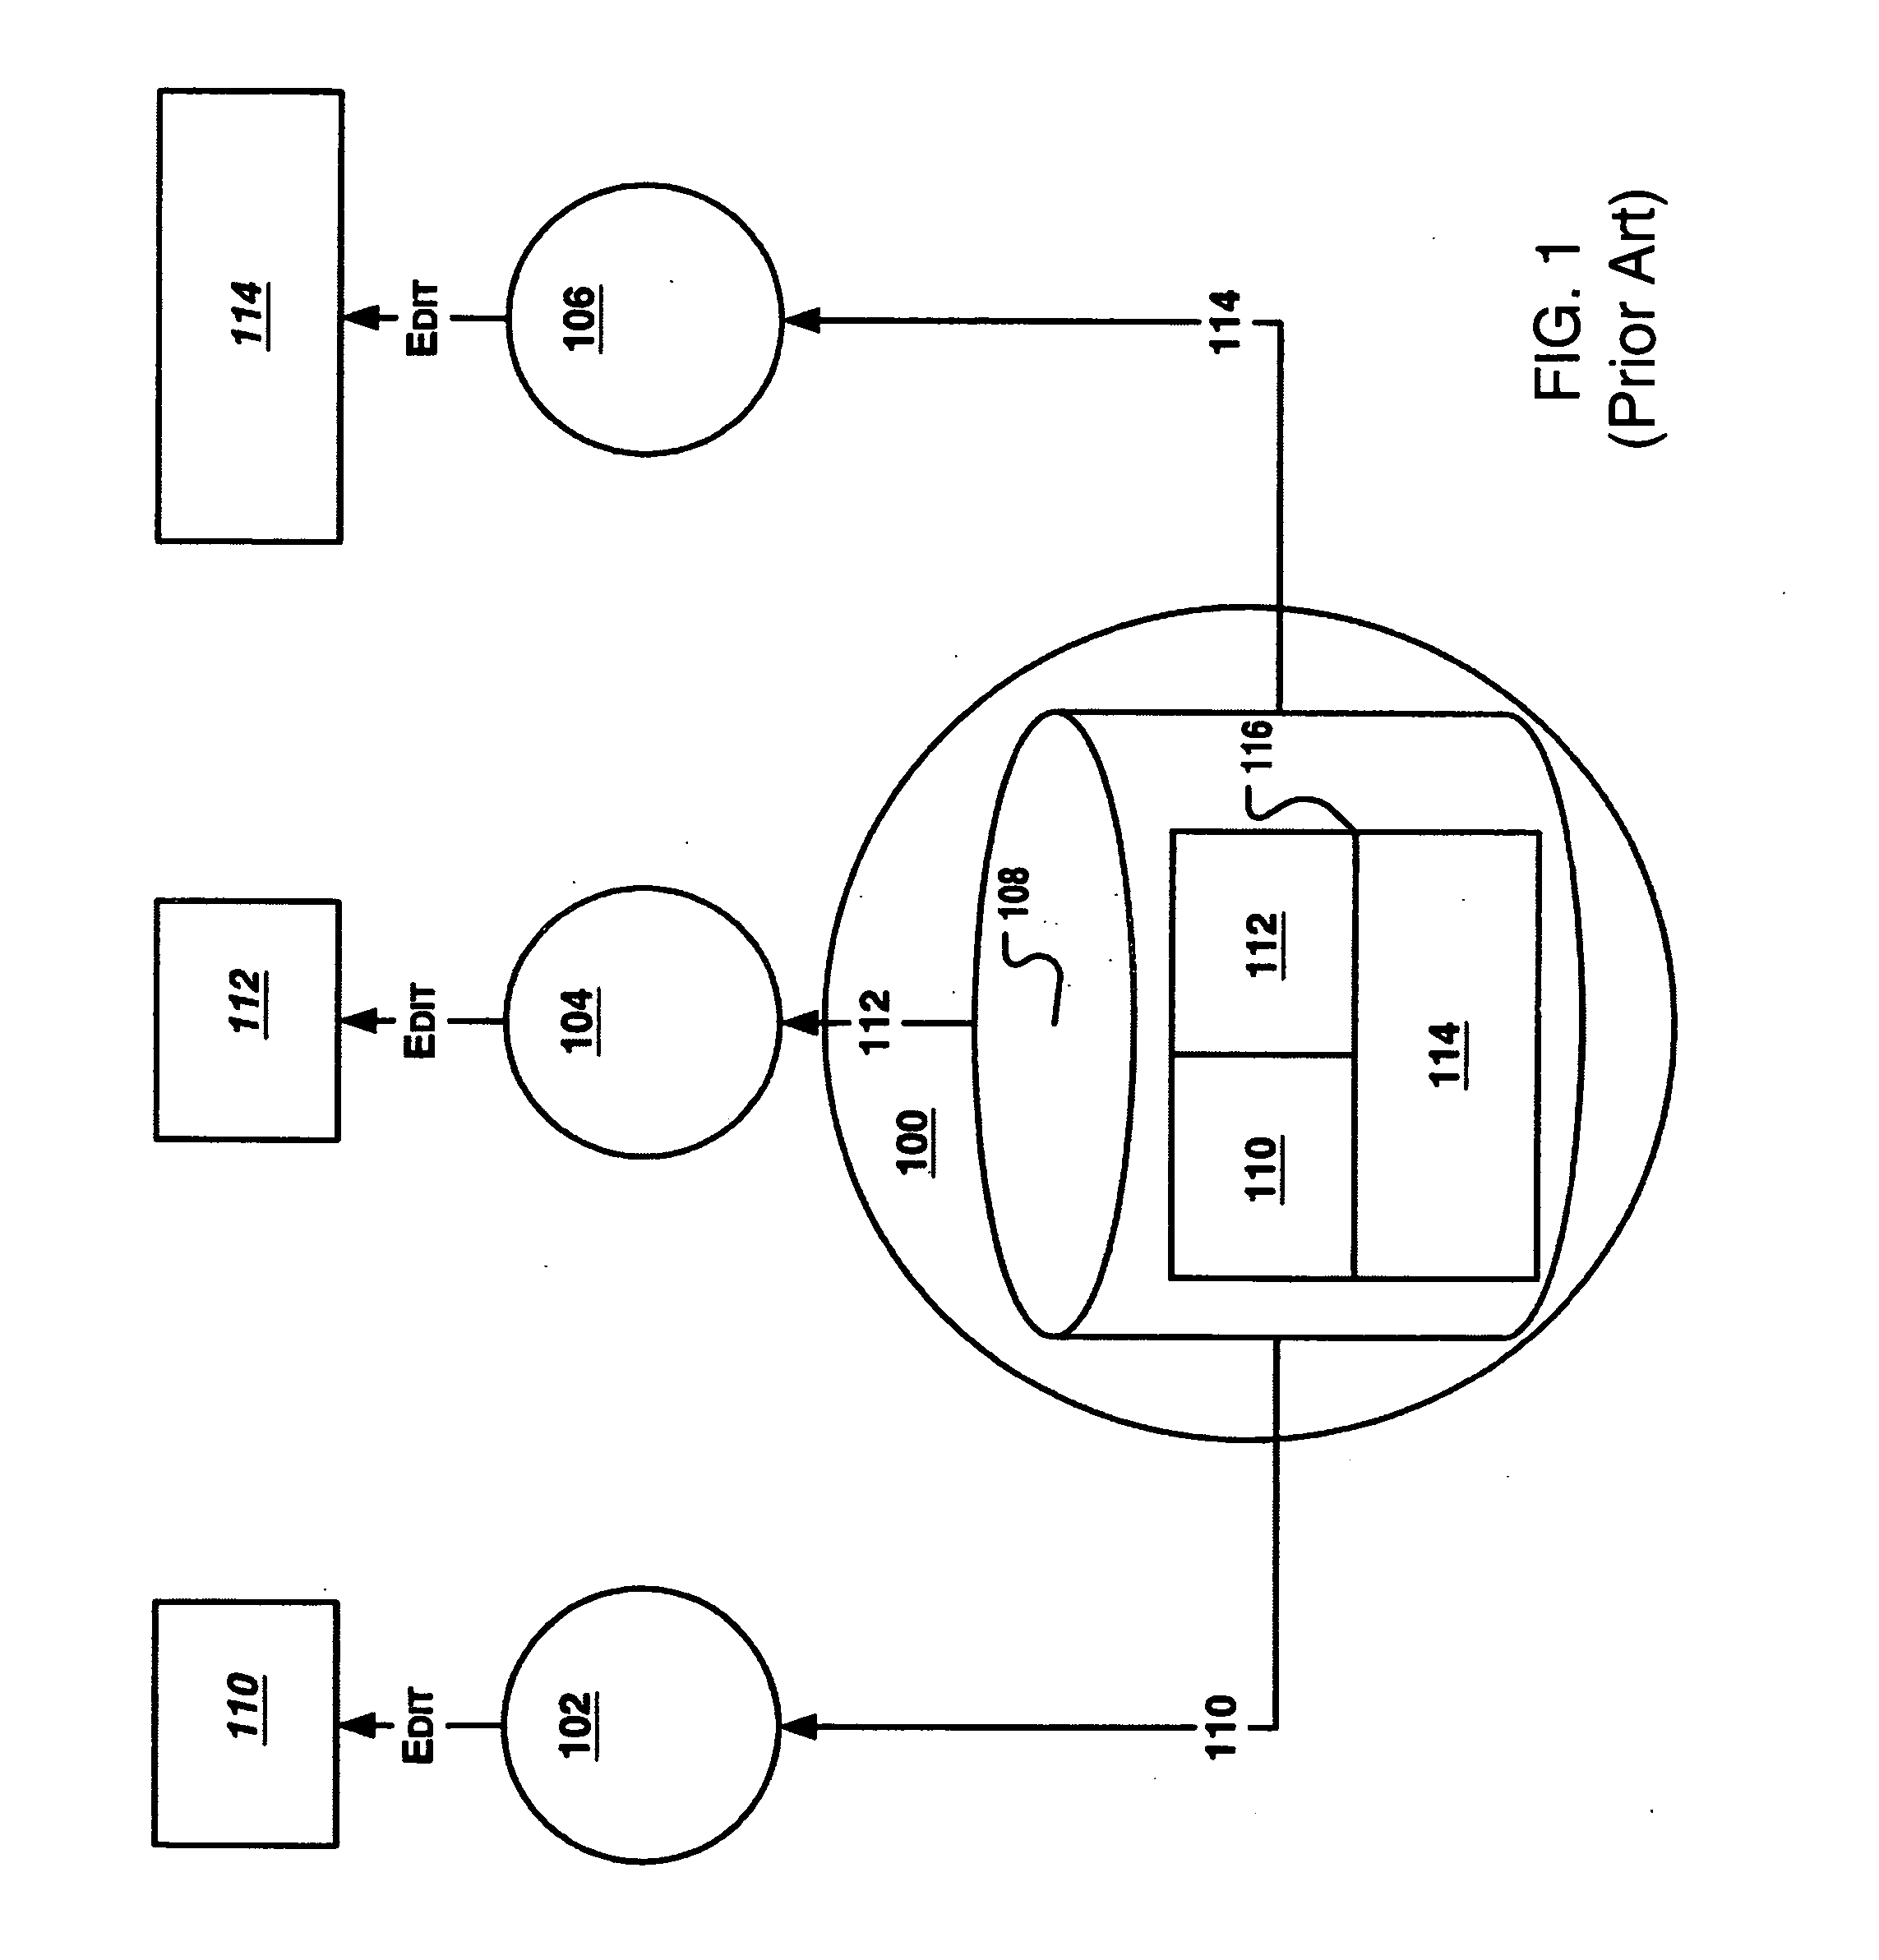 Reservation of design elements in a parallel printed circuit board design environment